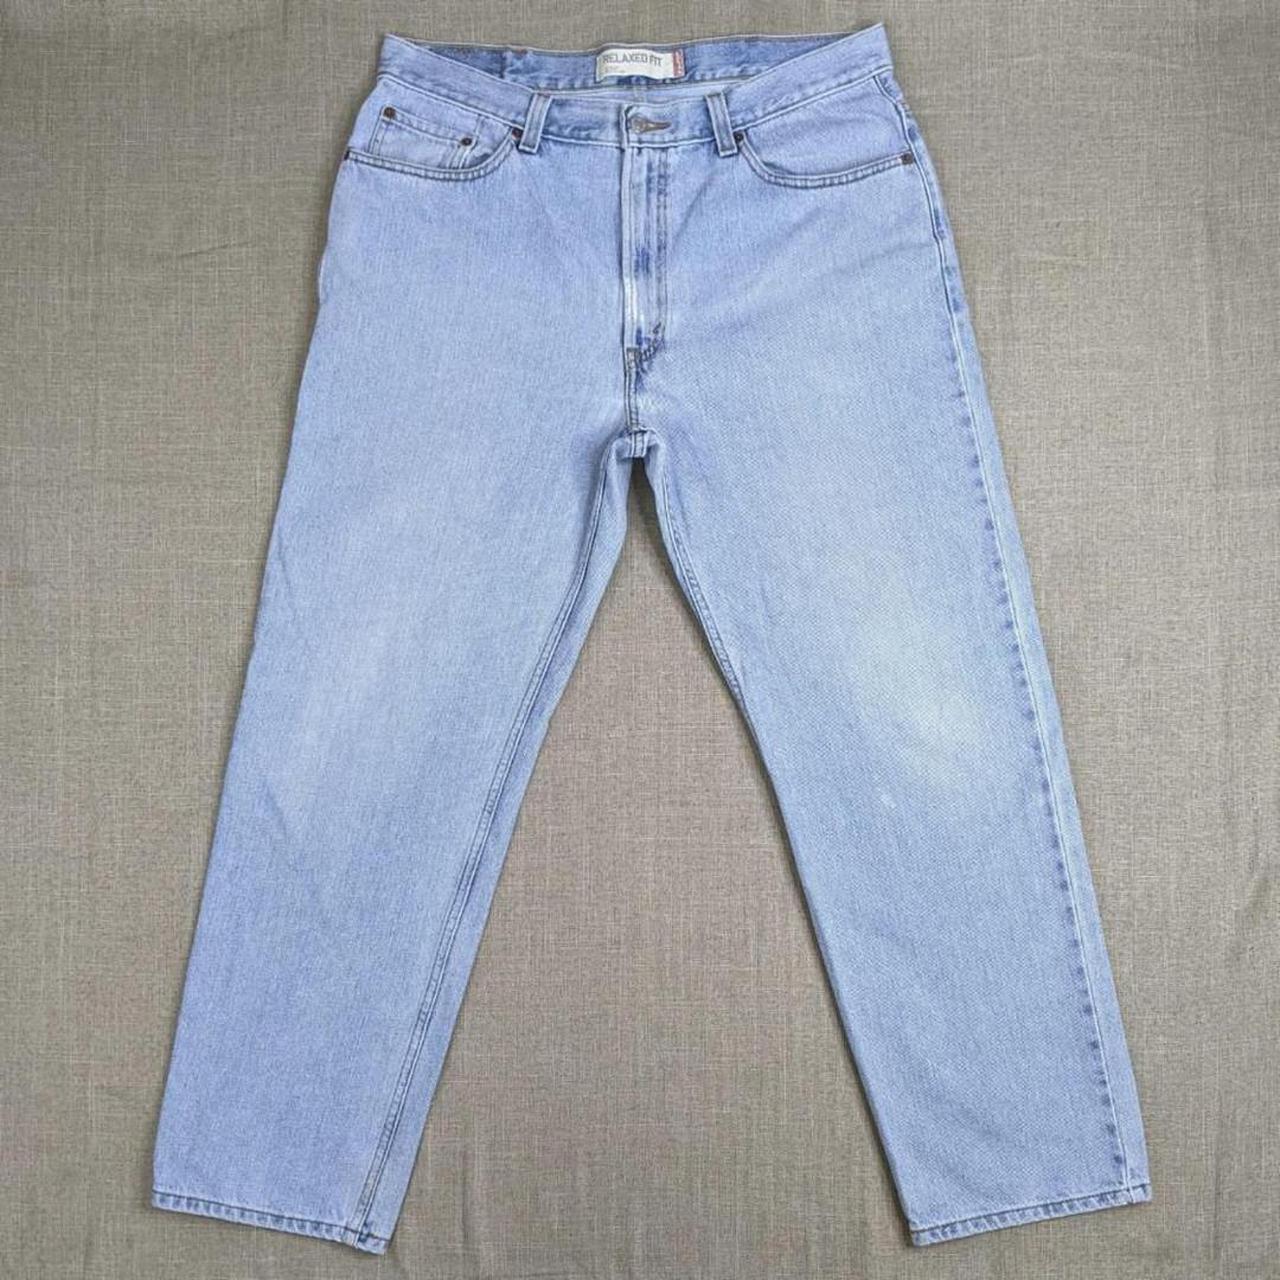 Product Image 3 - Vintage Levi's 550 jeans in